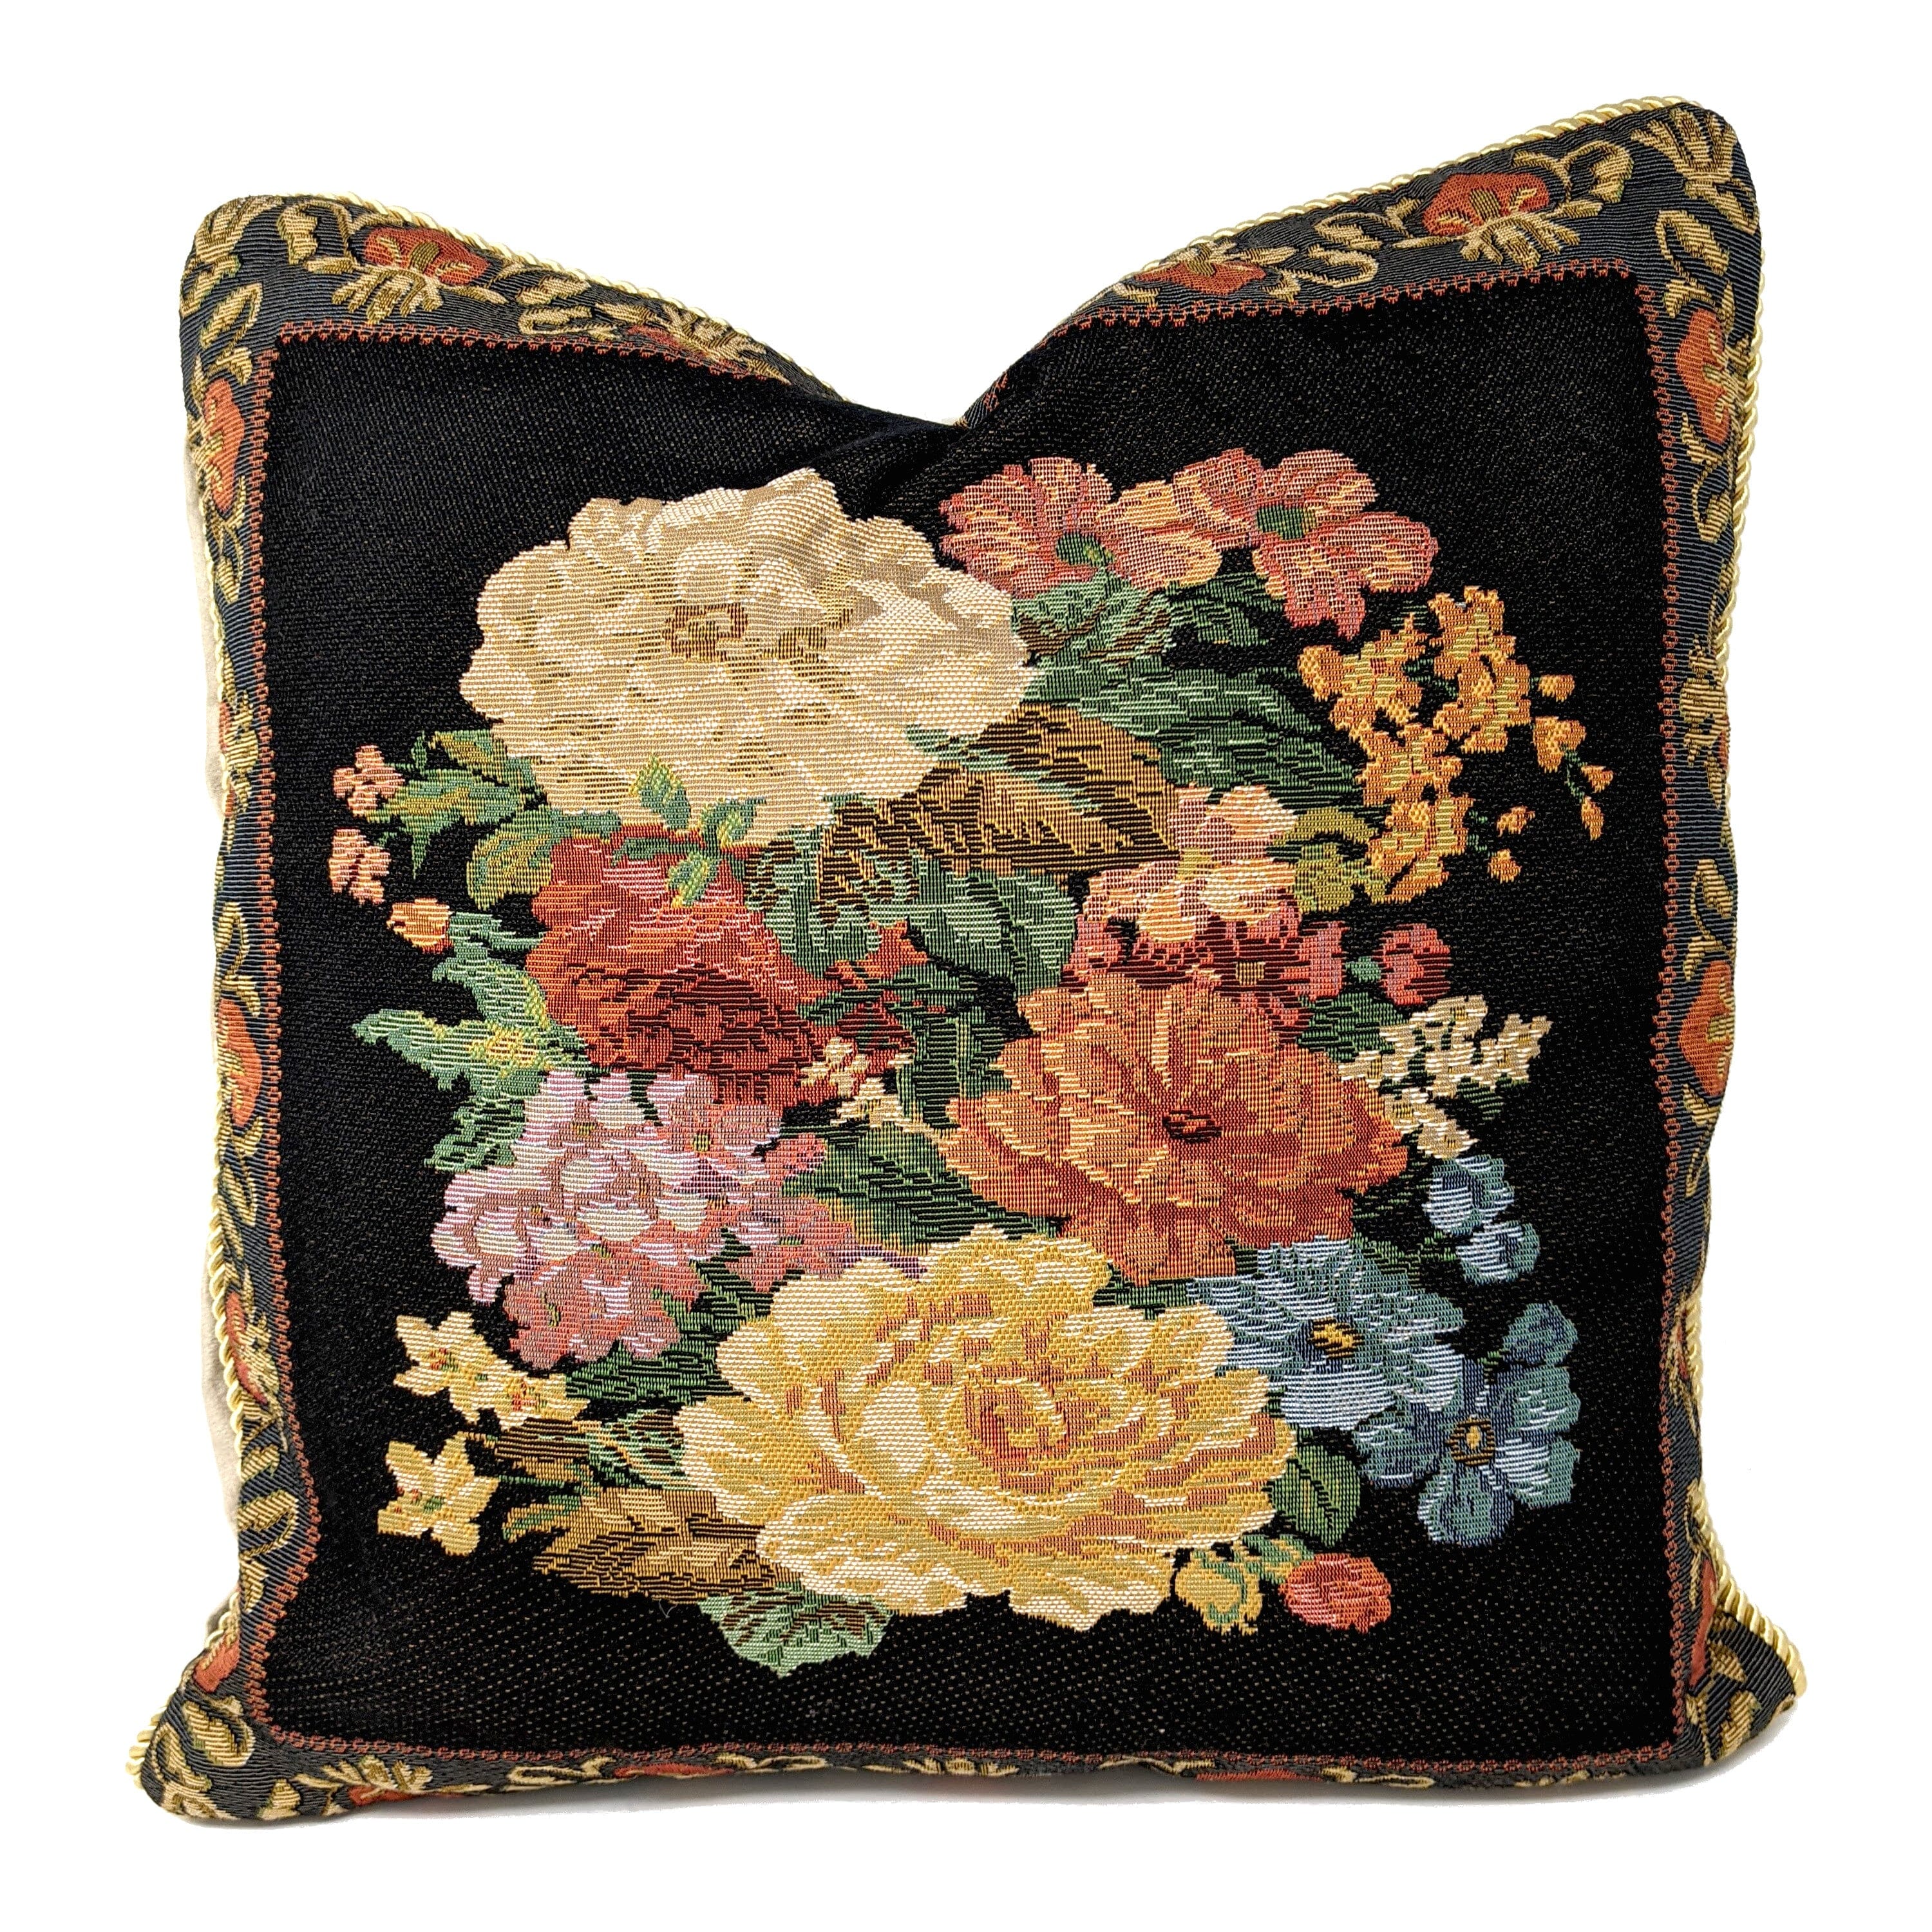 Tache Black Victorian Country Rustic Floral Midnight Awakening Tapestry Throw Pillow Cover (3089BL) - Tache Home Fashion